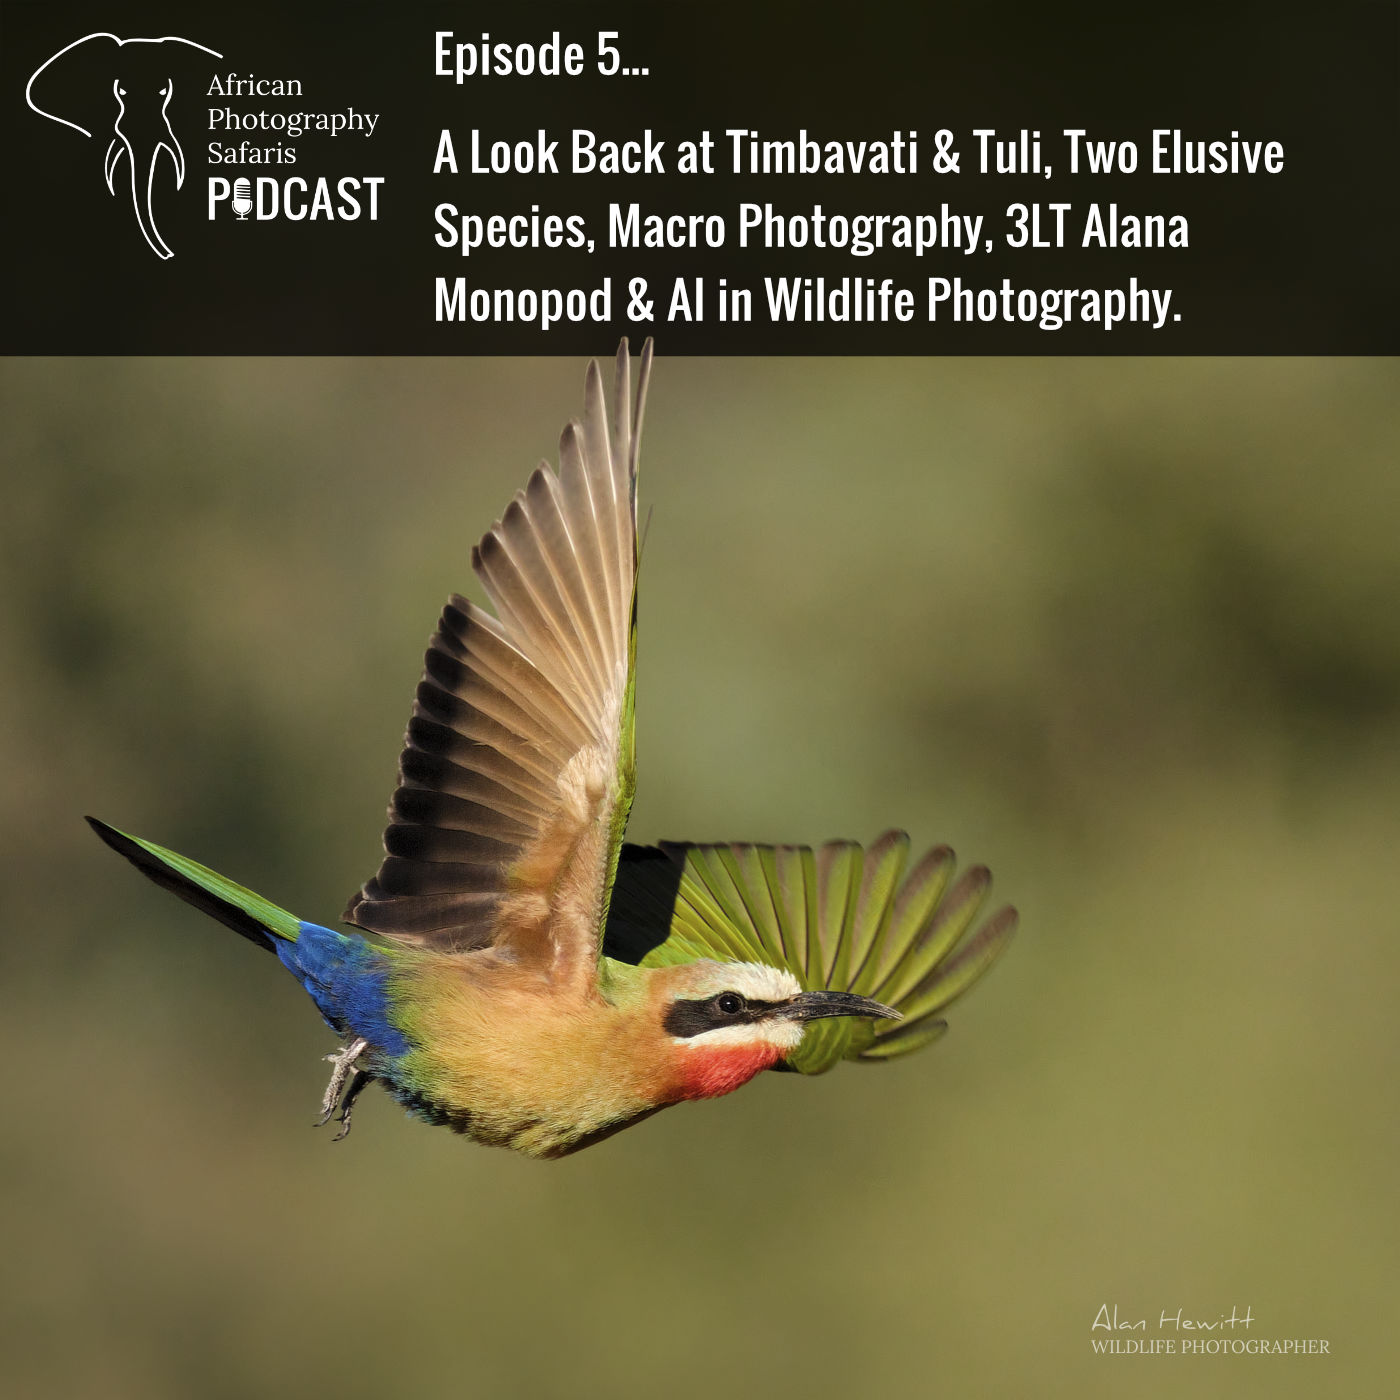 Episode 5 - A Look Back at Timbavati & Tuli, Two Elusive Species, Macro Photography, 3LT Alana Monopod & AI in Wildlife Photography